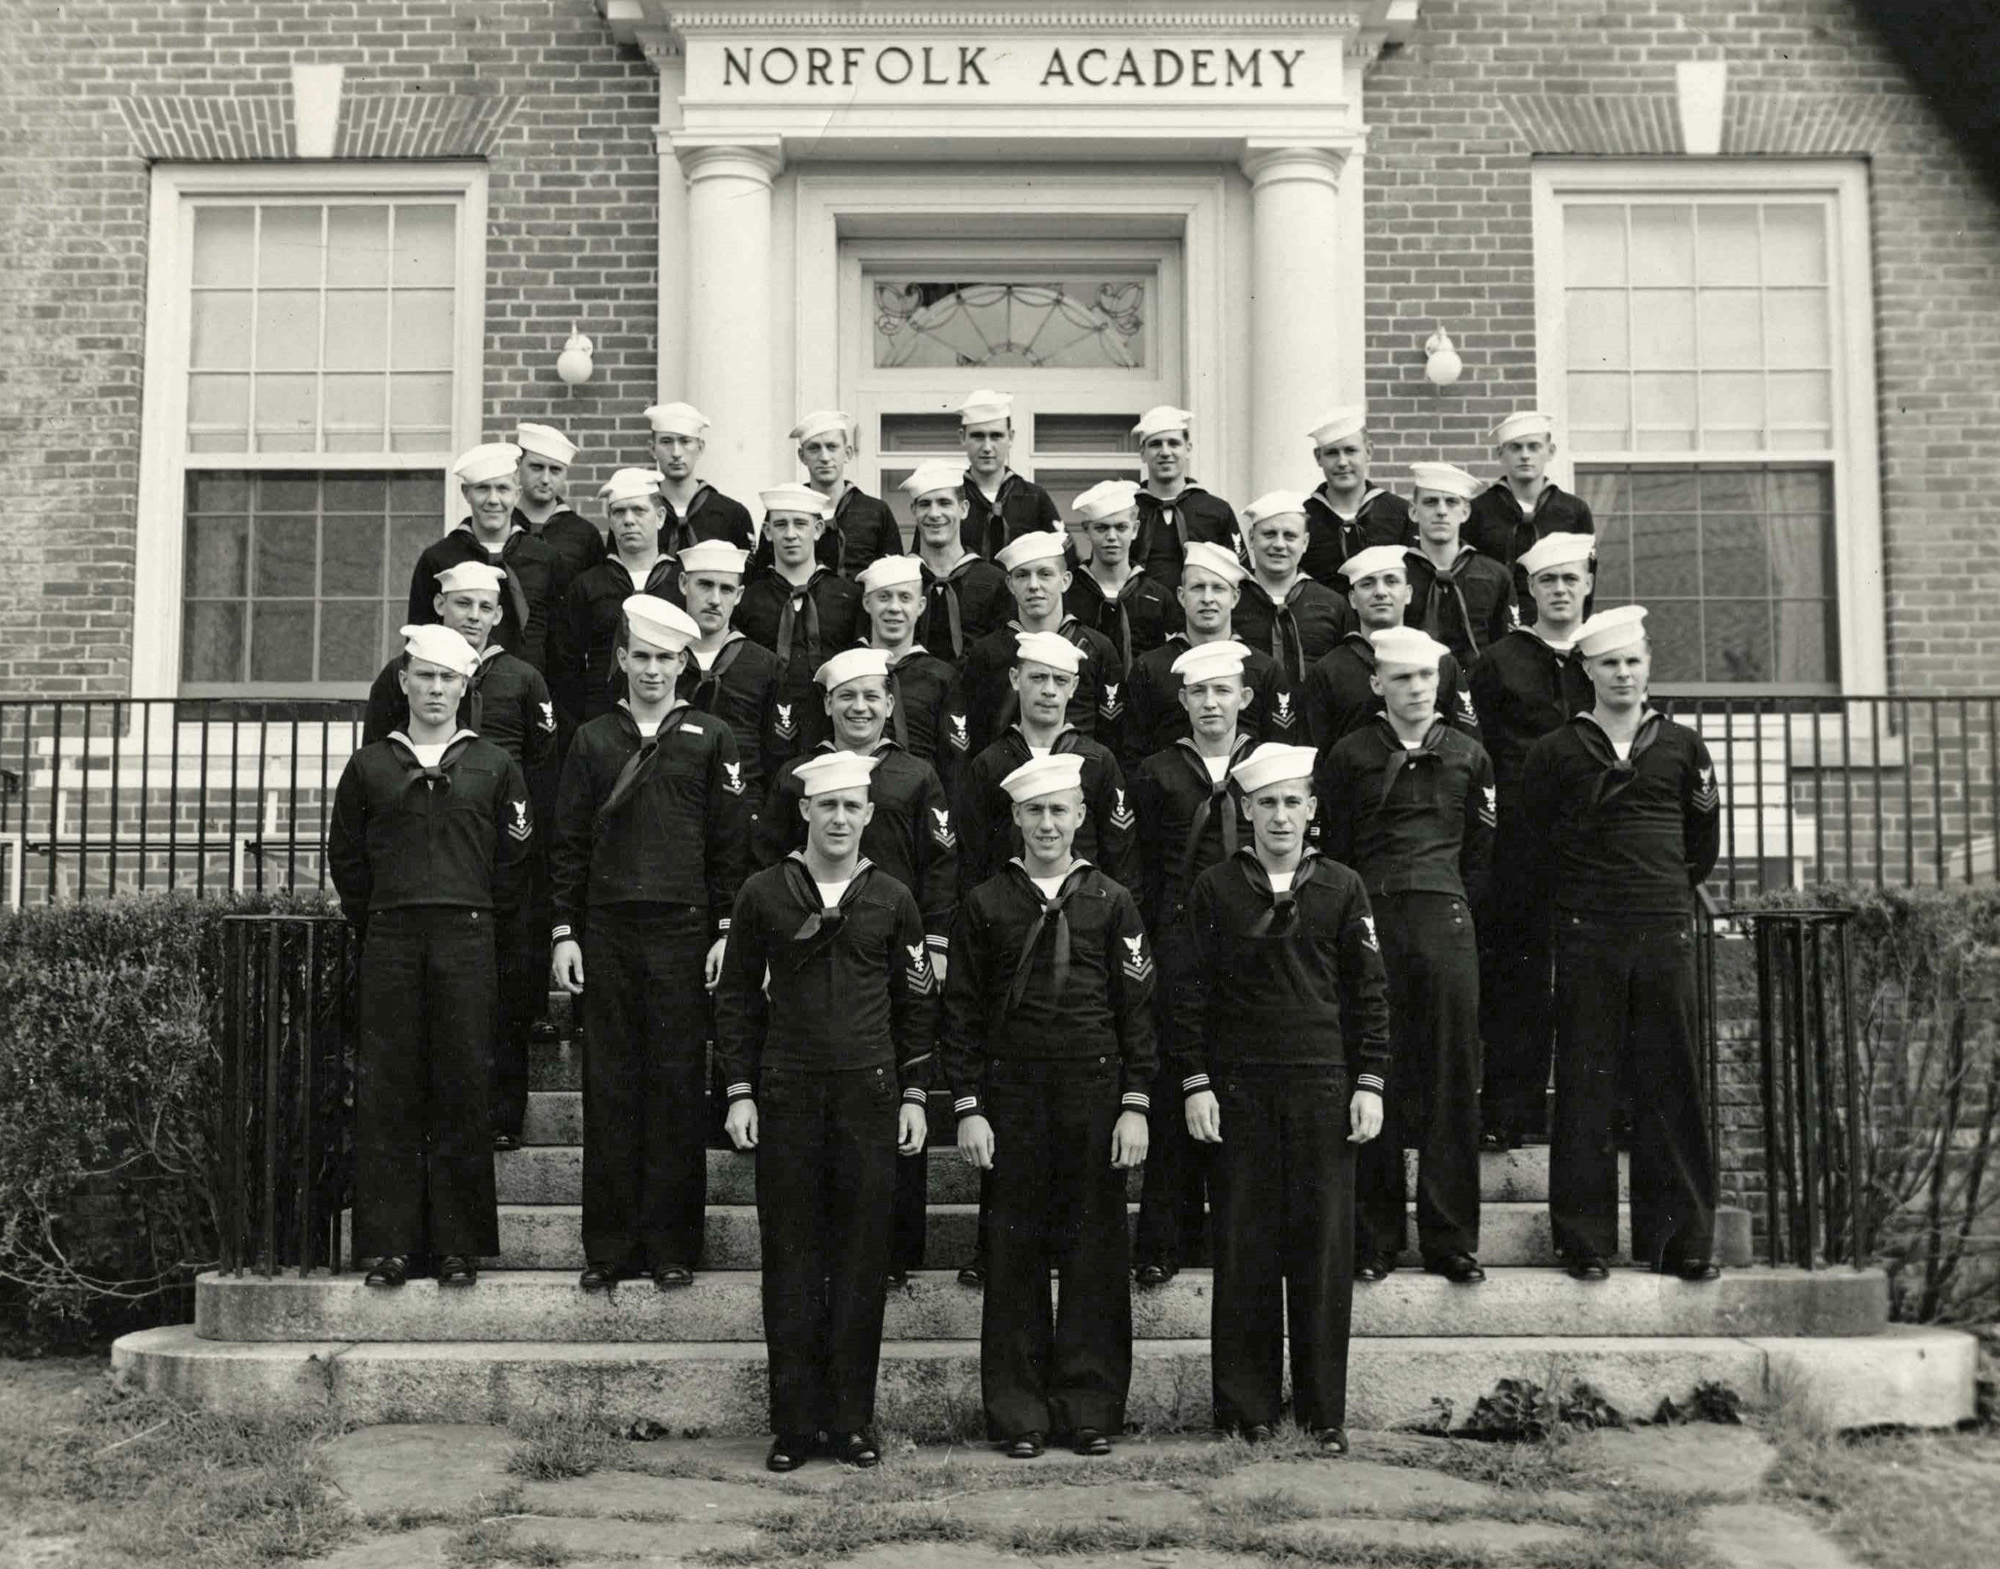 Another photo from the Navy career of James Thurston Watson (2nd row from top, 4th swabbie from left). Seems to be a machinist mate school held at the civilian Norfolk Academy in Hampton Roads, Virginia. Their names and home addresses are written on the reverse of the photo and this group was from every corner of the US. 

He joined the USS Anne Arundel AP-76 (commissioned September 1942) and sailed for the November invasion of North Africa. Called Thurston by his family, he became one of the chief petty officers of AP-76 and remained aboard until joining another ship at the end of the war. In addition to North Africa, Thurston was a veteran of Stuka attacks off Sicily, the North Atlantic convoys, the Normandy invasion, and Kamikazi attacks at Okinawa. Ten days after the surrender Anne Arundel steamed into Tokyo Bay. View full size.